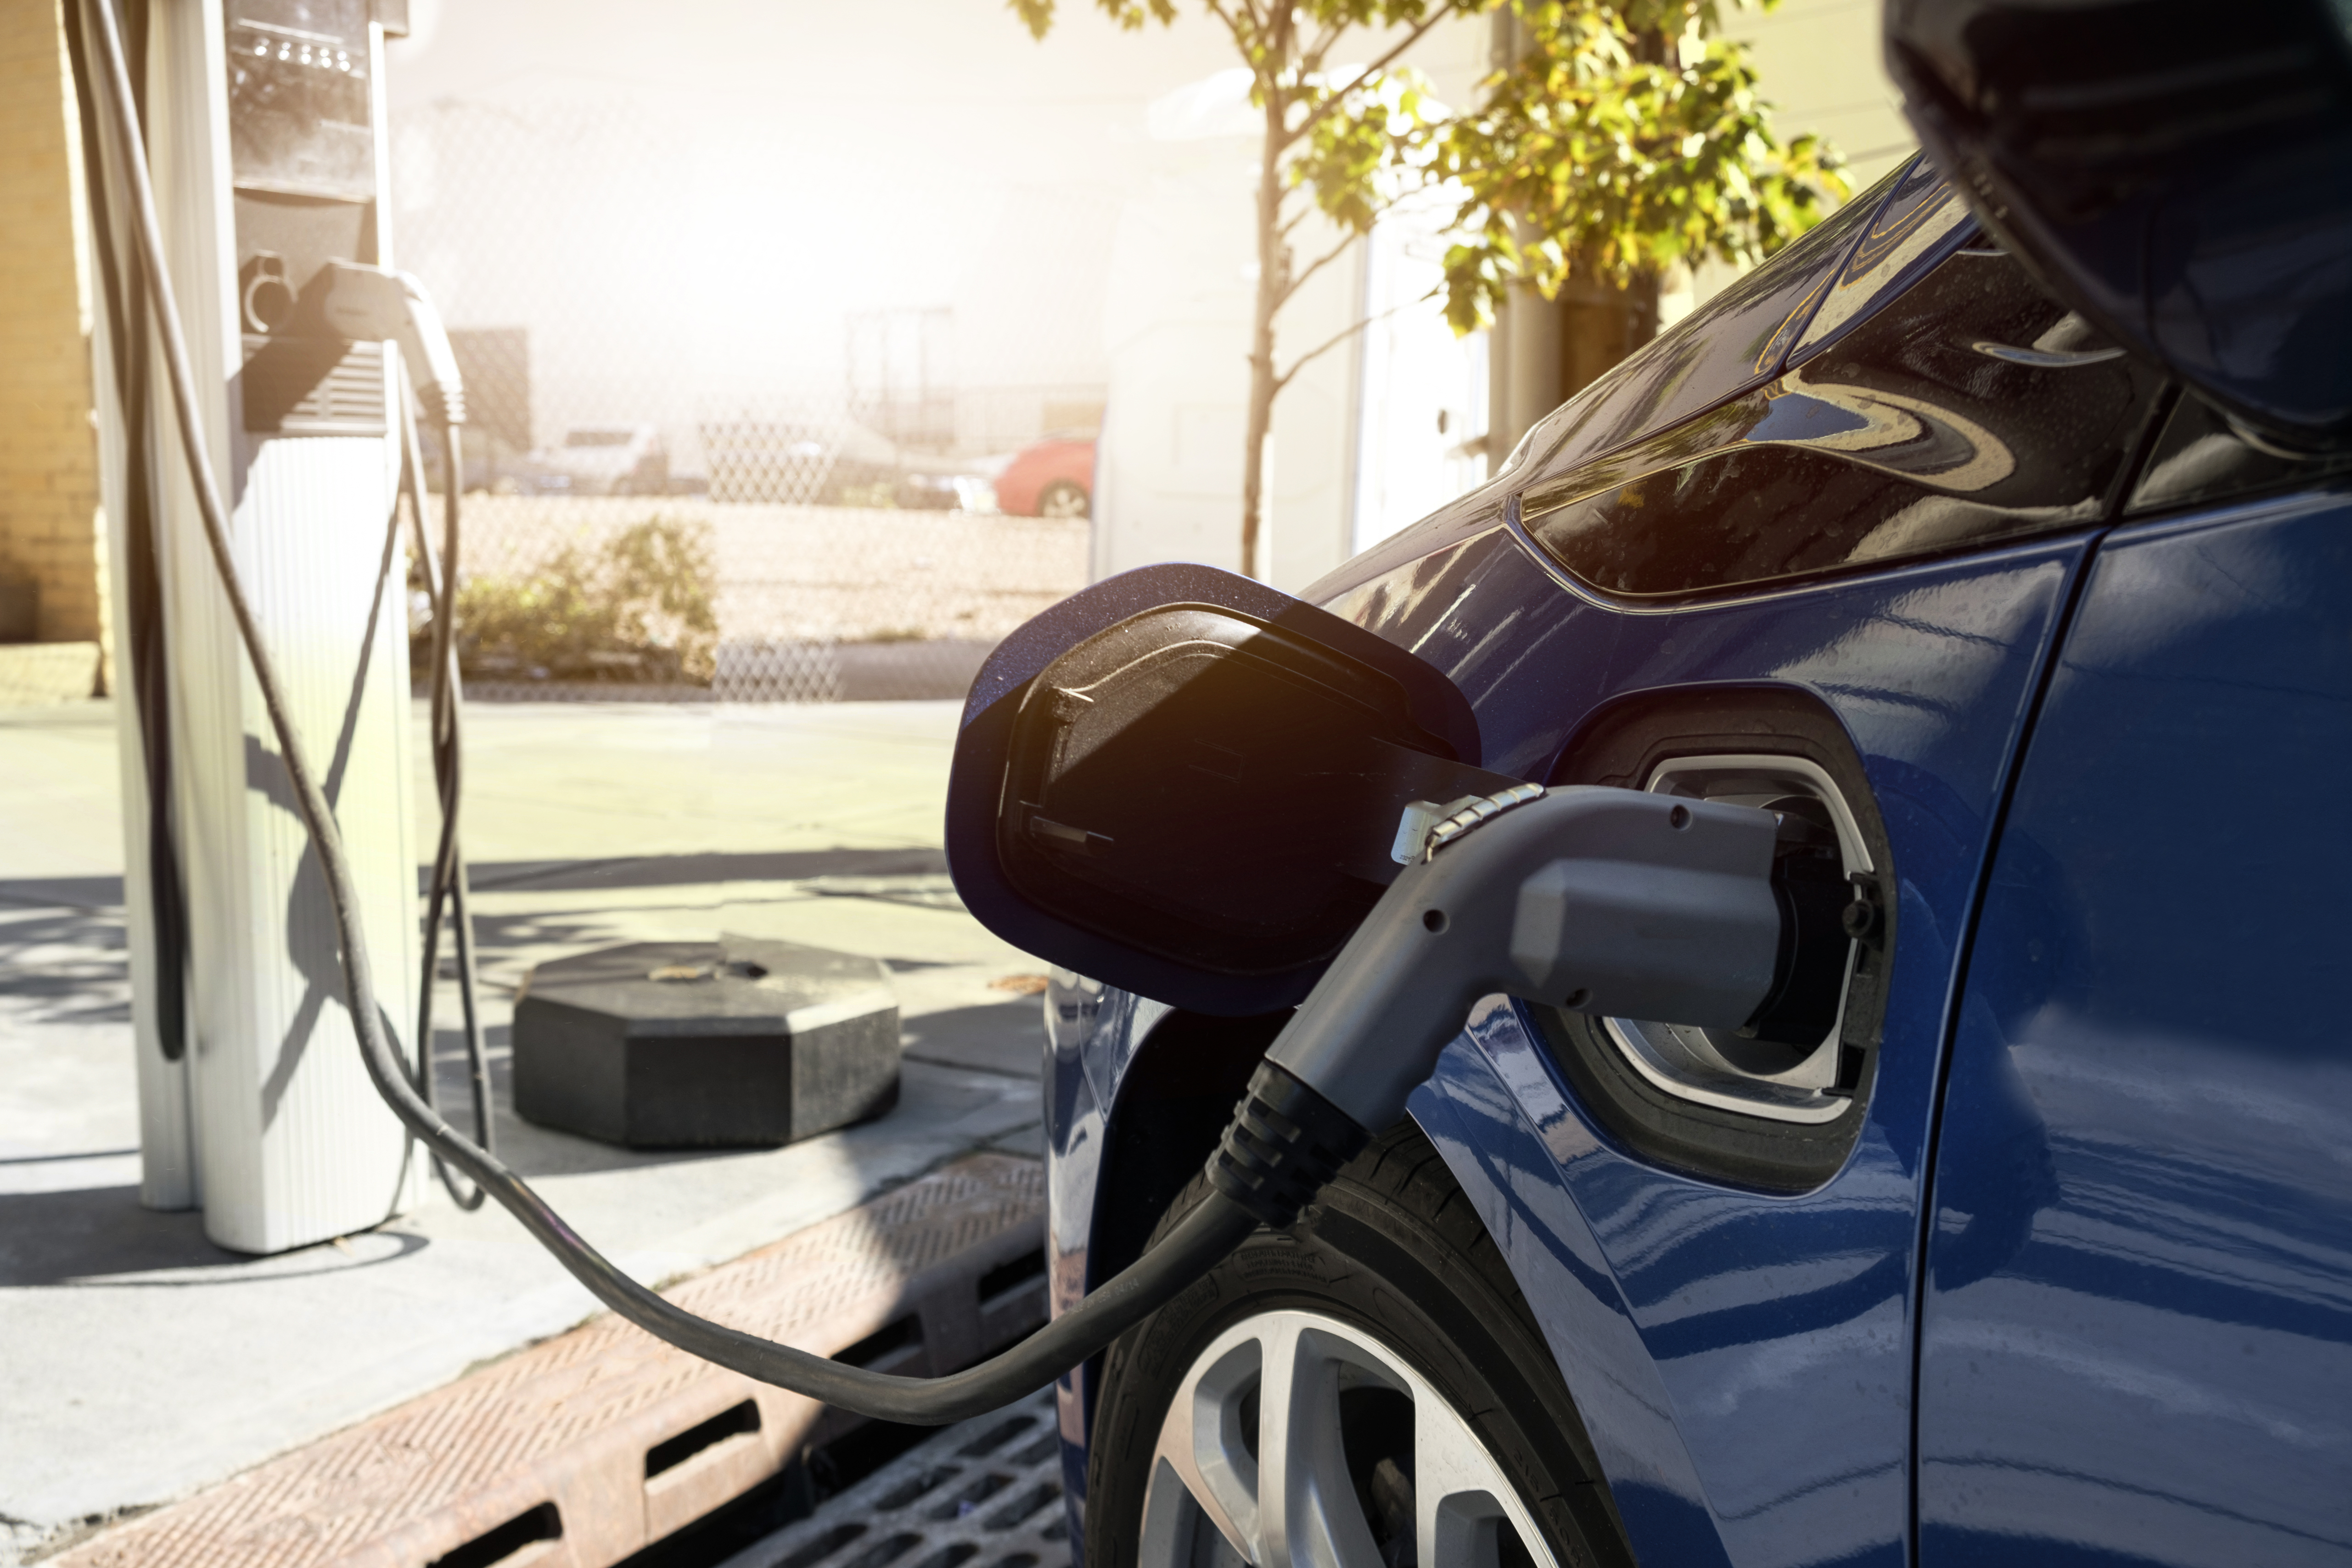 Find EV-friendly Accommodations with Ease: Hotels with Electric Vehicle Chargers